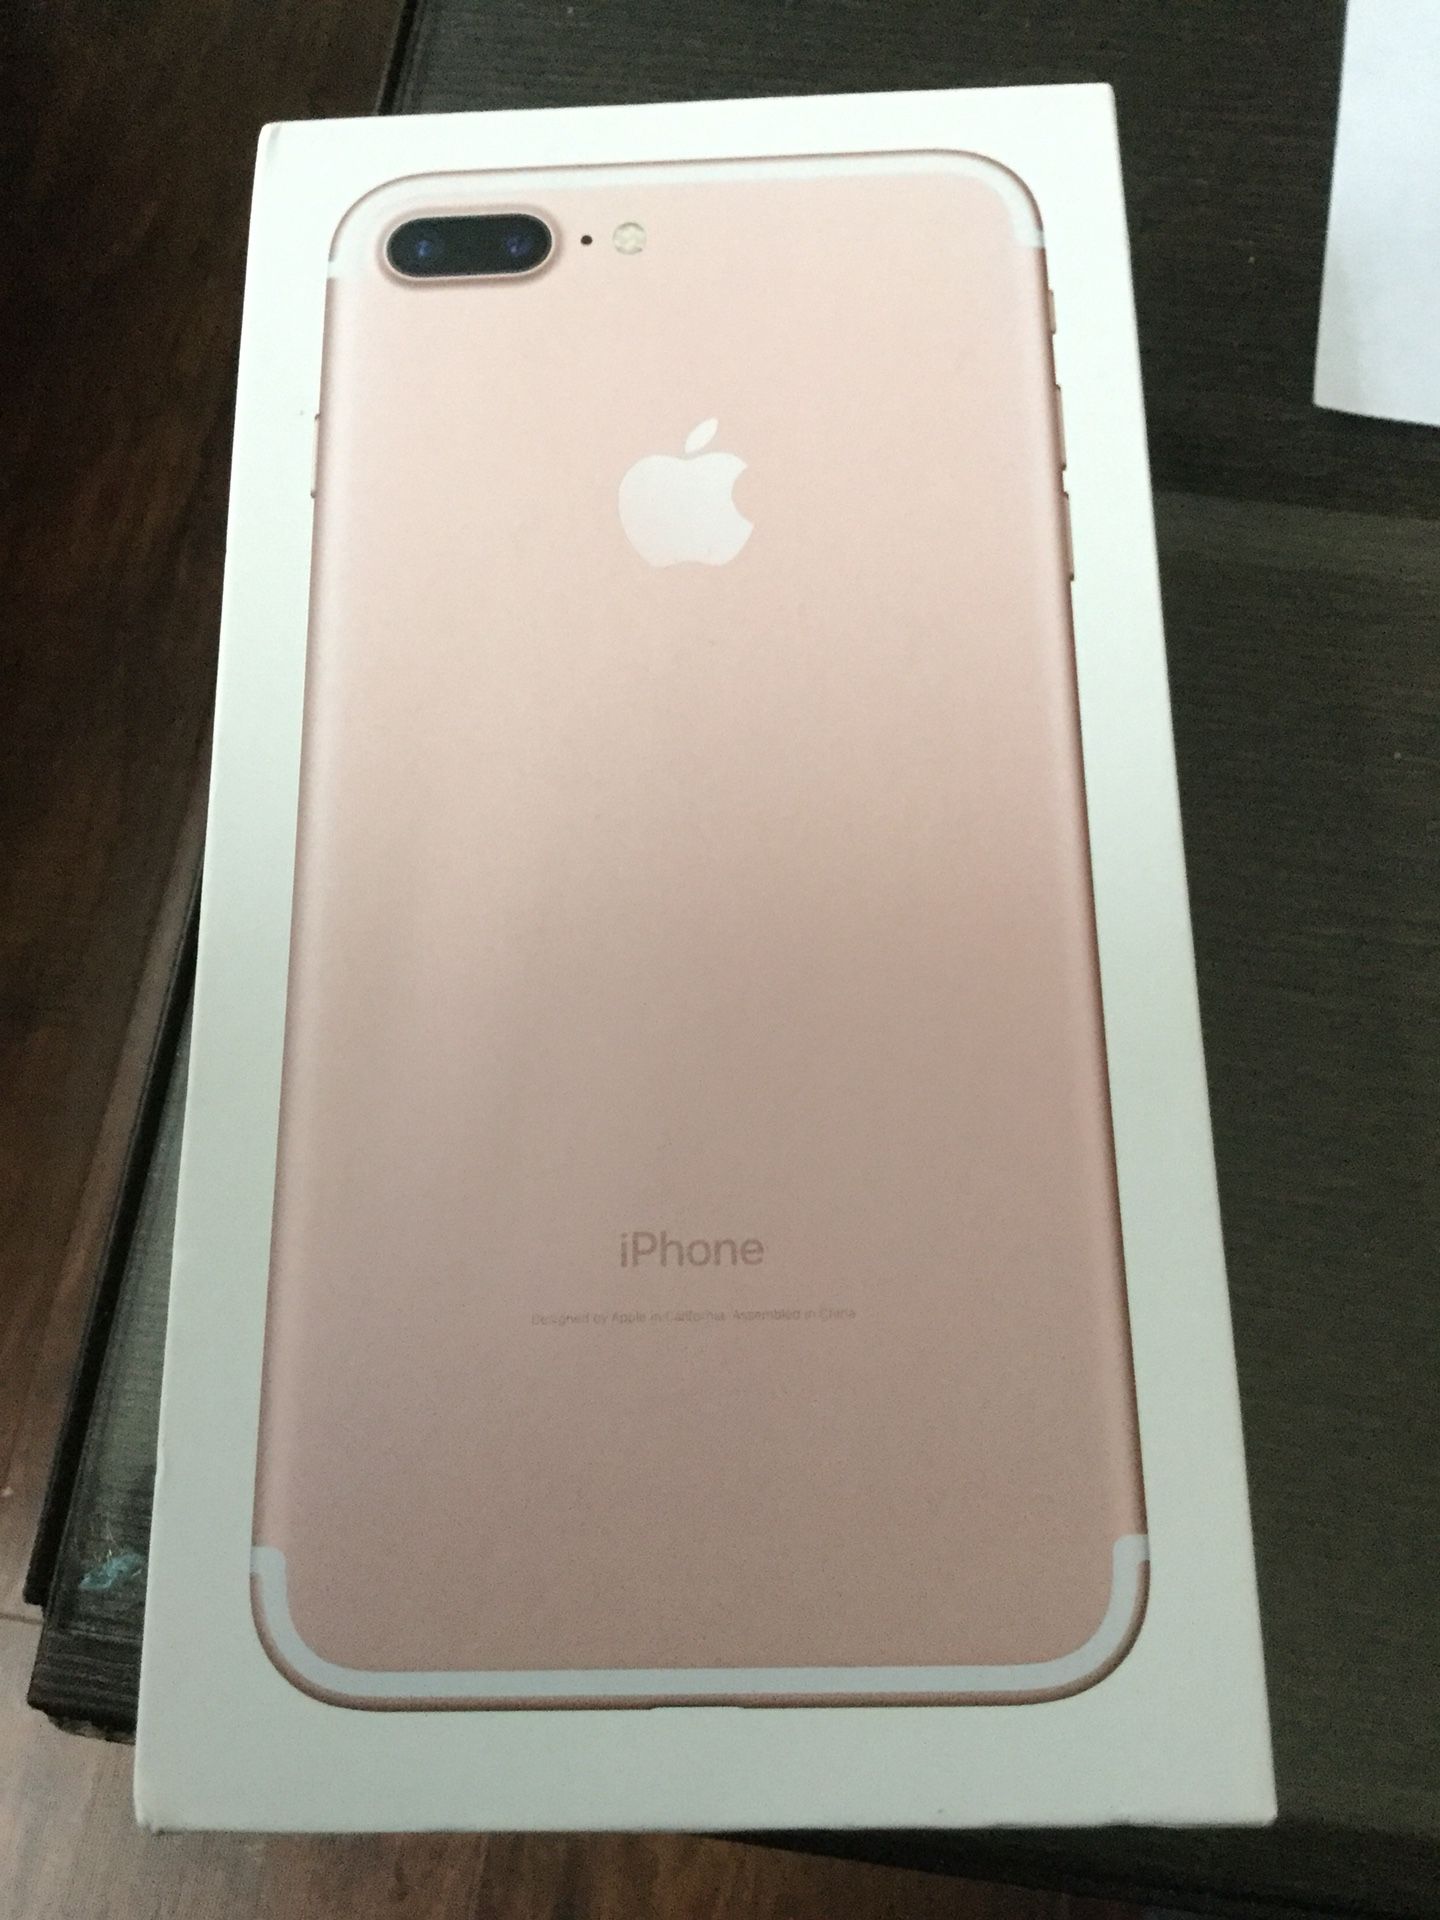 New condition, Factory Unlocked, 32GB, Apple Iphone 7, Rose Gold!